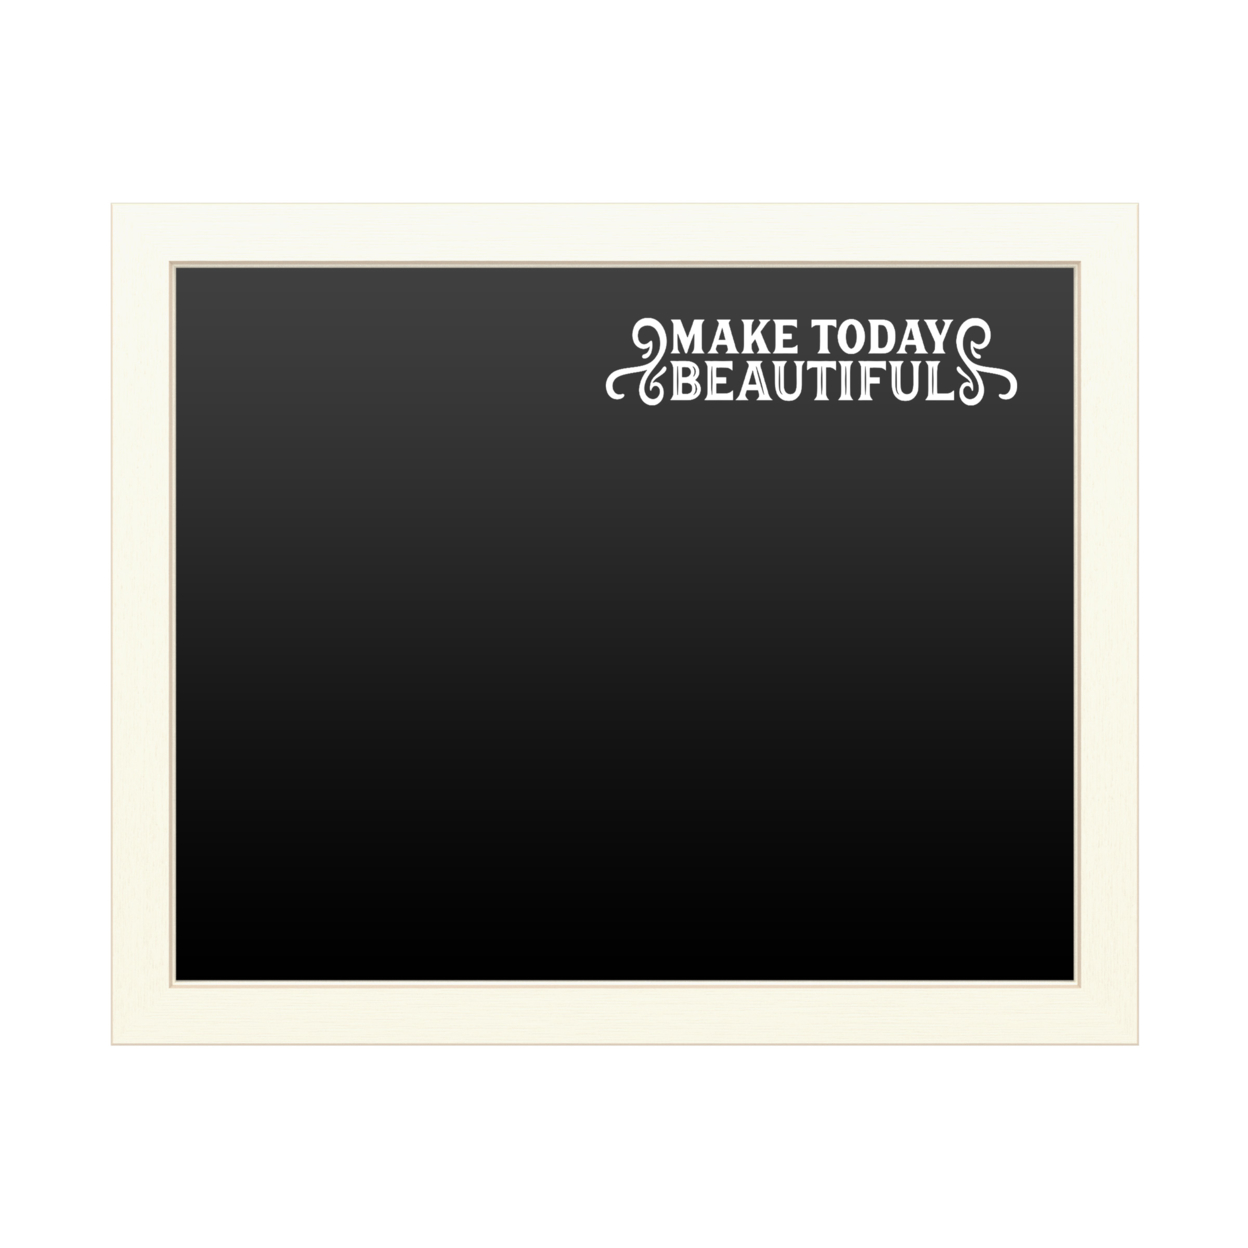 16 X 20 Chalk Board With Printed Artwork - Make Today Beautiful White Board - Ready To Hang Chalkboard